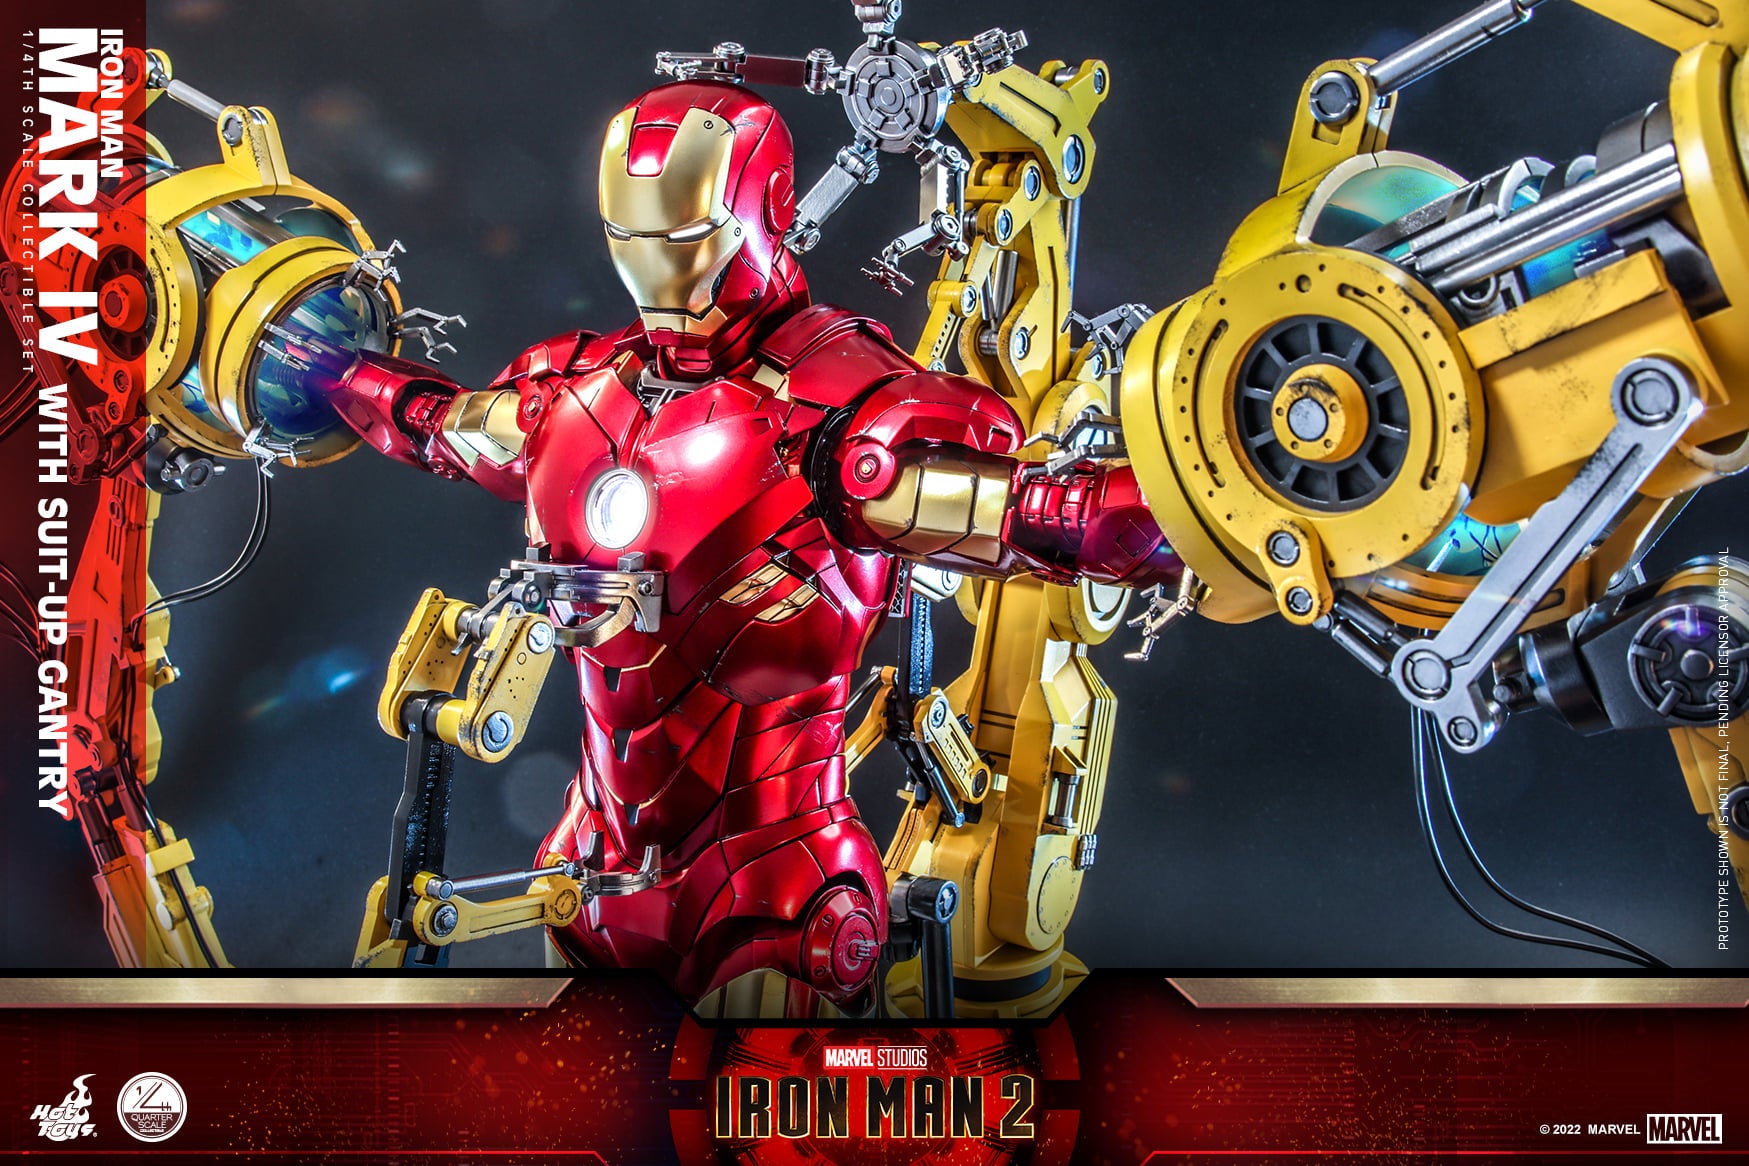 Hot Toys - QS021 - Iron Man 2 - Iron Man Mark IV with Suit-Up Gantry (1/4 Scale) - Marvelous Toys